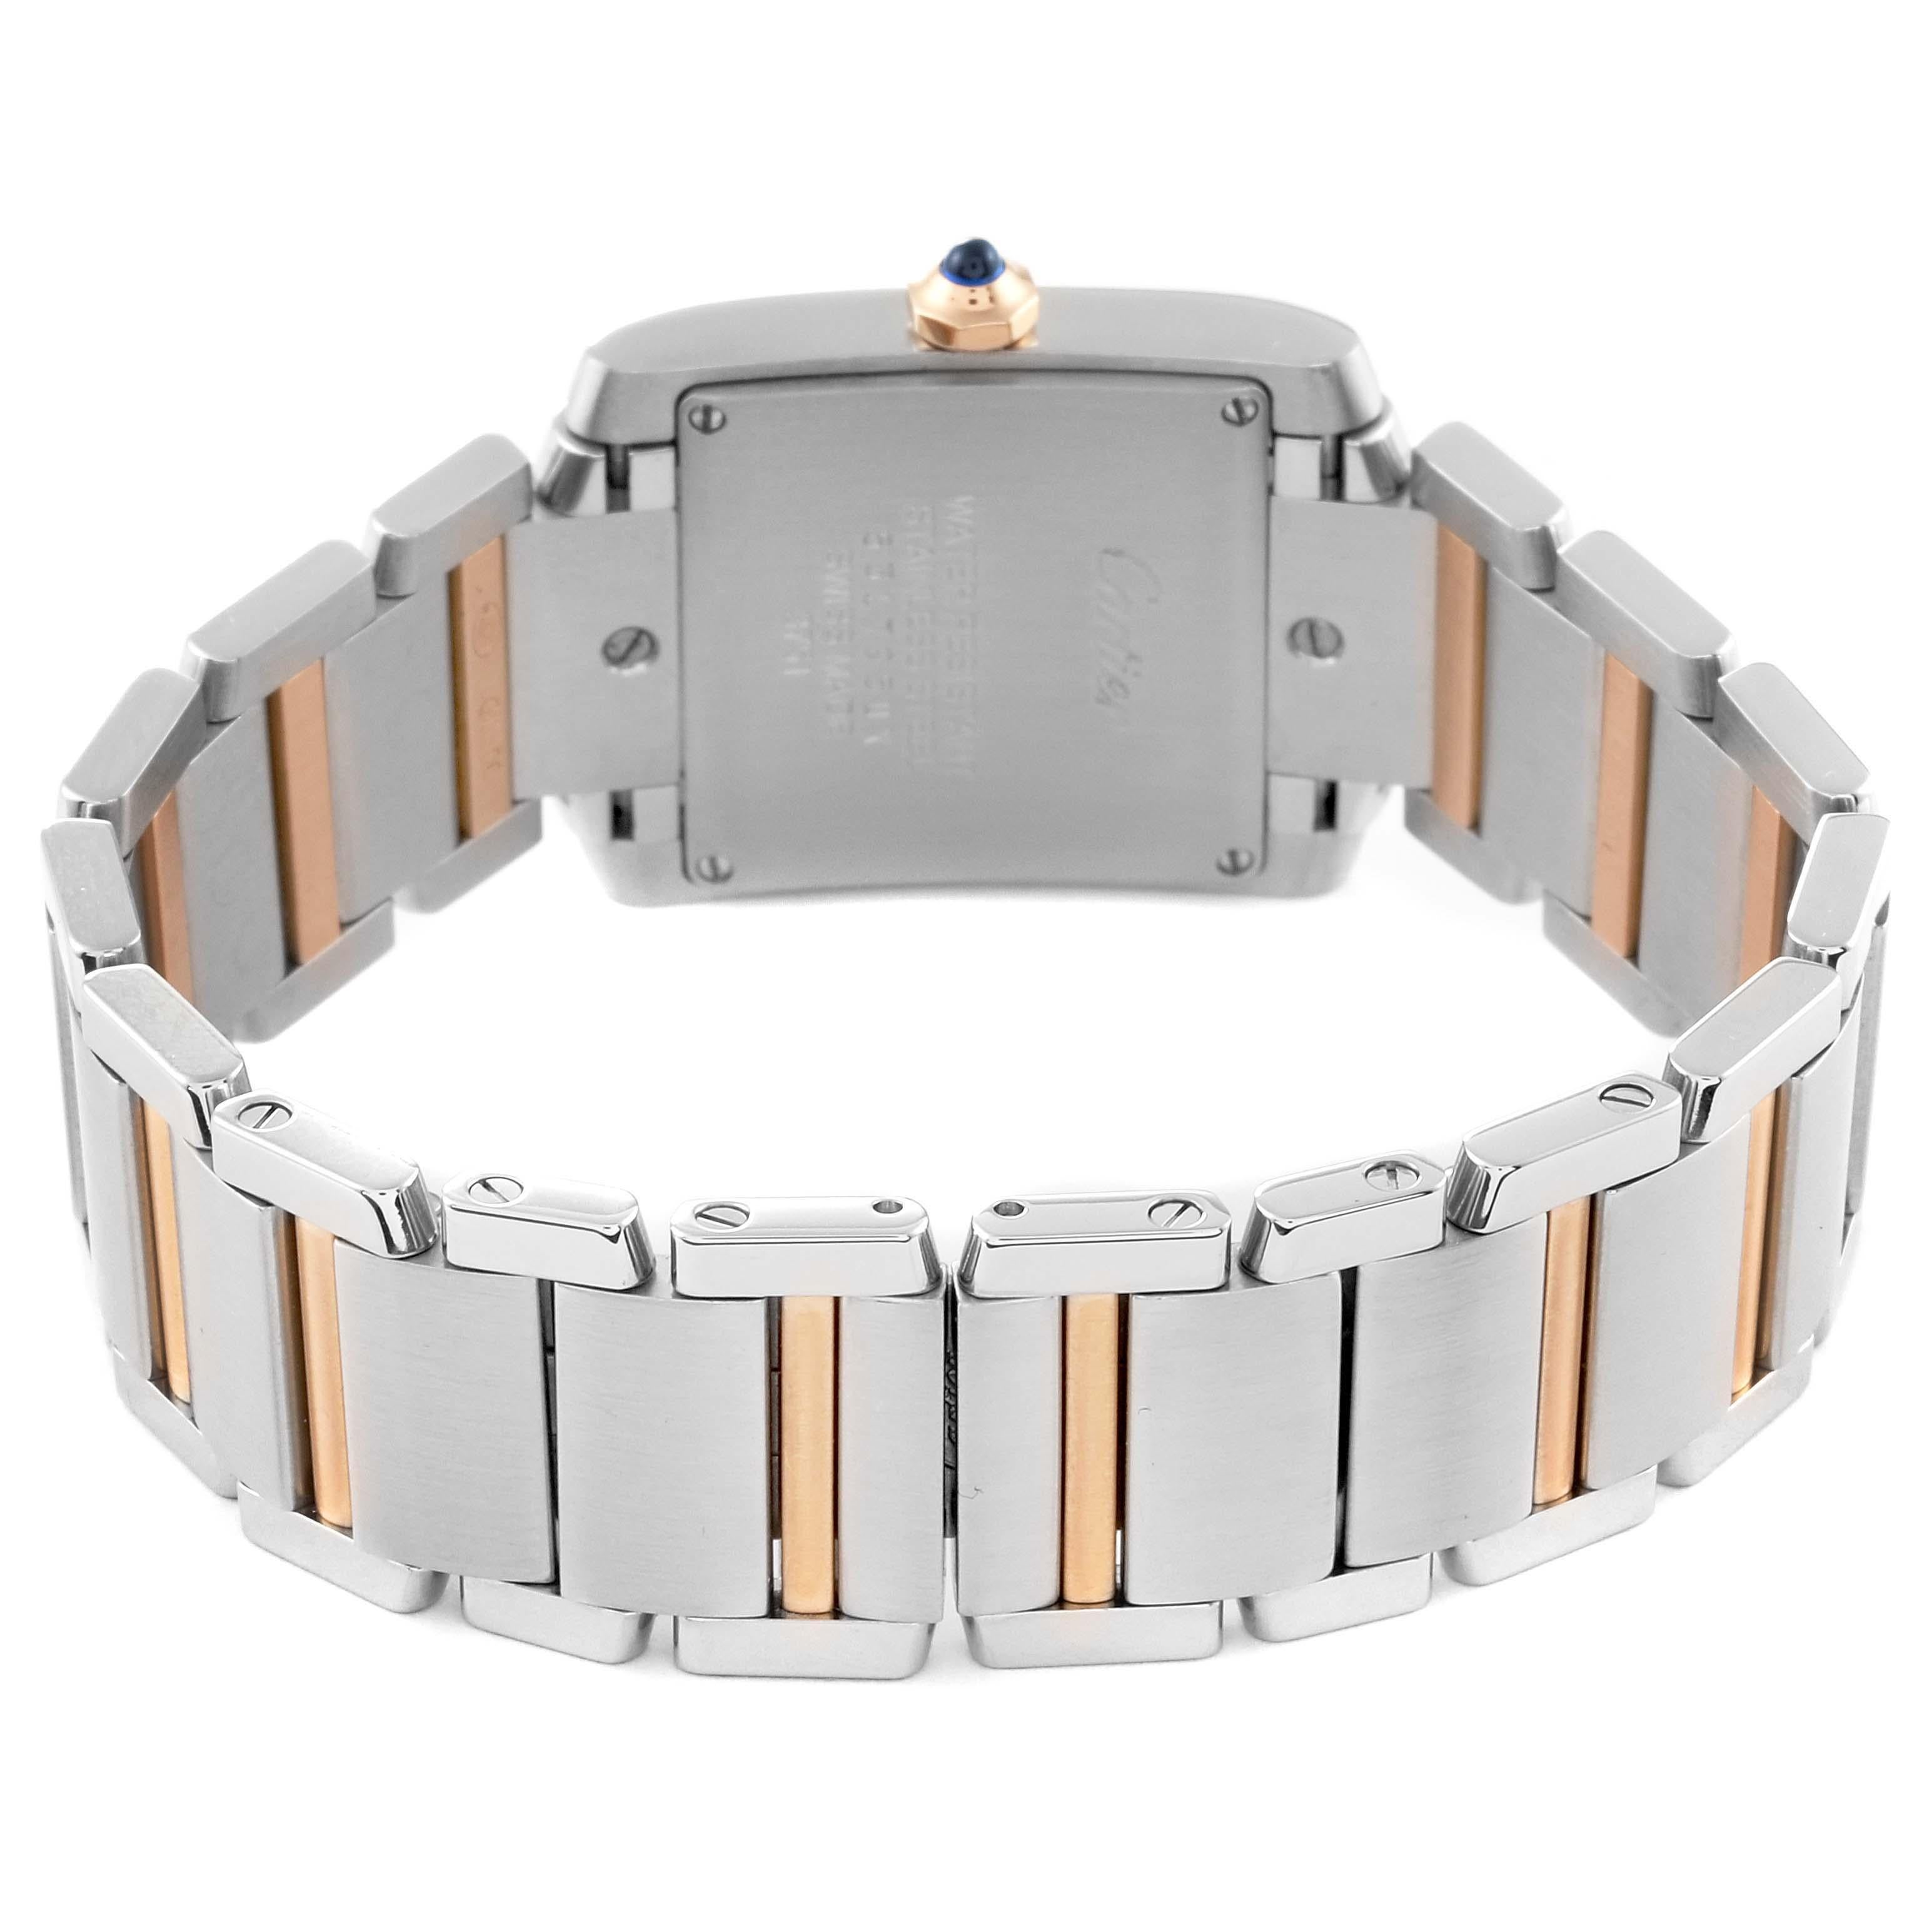 Cartier Tank Francaise Midsize Diamond Steel Rose Gold Ladies Watch WE110005 For Sale 4